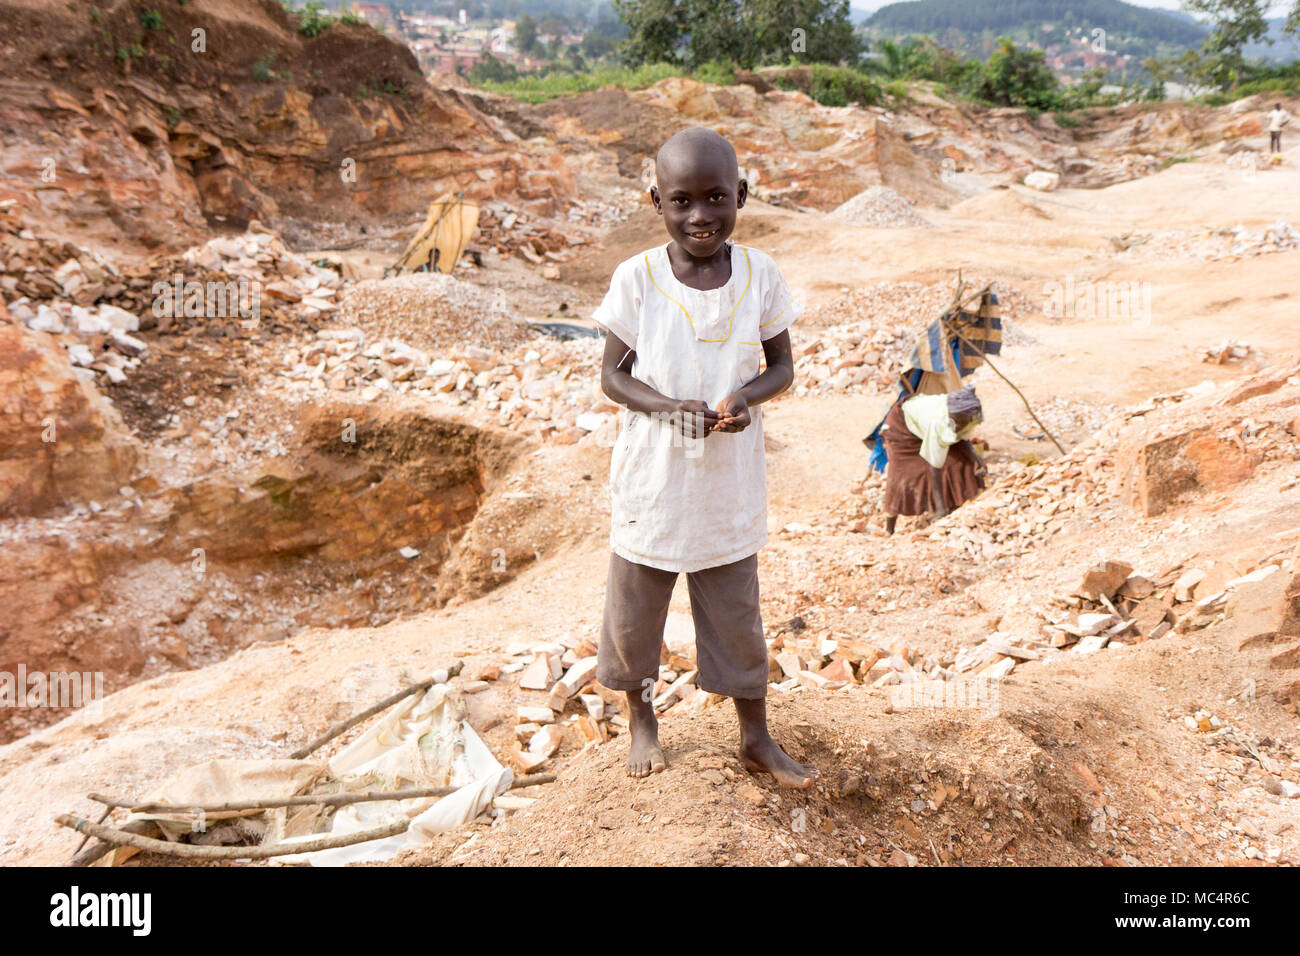 Lugazi, Uganda. June 18 2017. A smiling Ugandan boy standing in a quarry. People in the background are breaking rocks into small slabs for sale to the Stock Photo